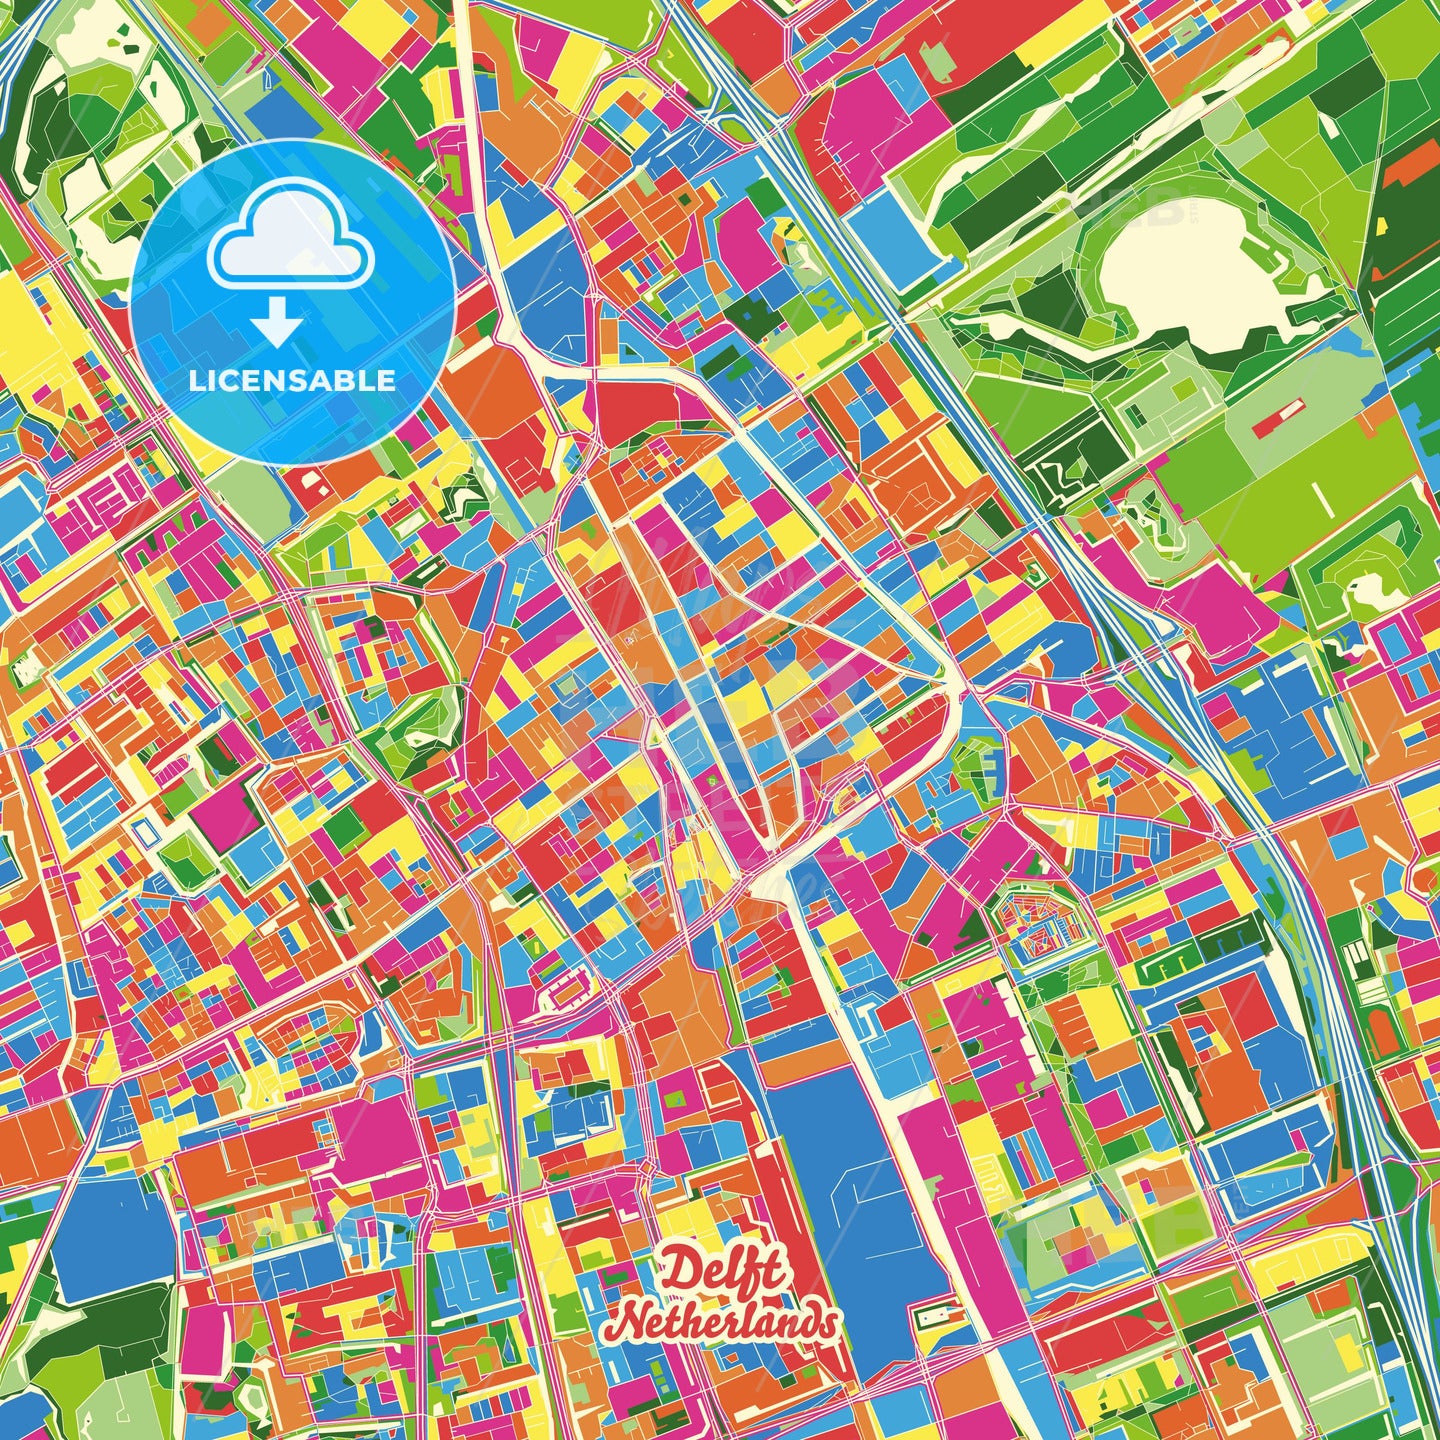 Delft, Netherlands Crazy Colorful Street Map Poster Template - HEBSTREITS Sketches